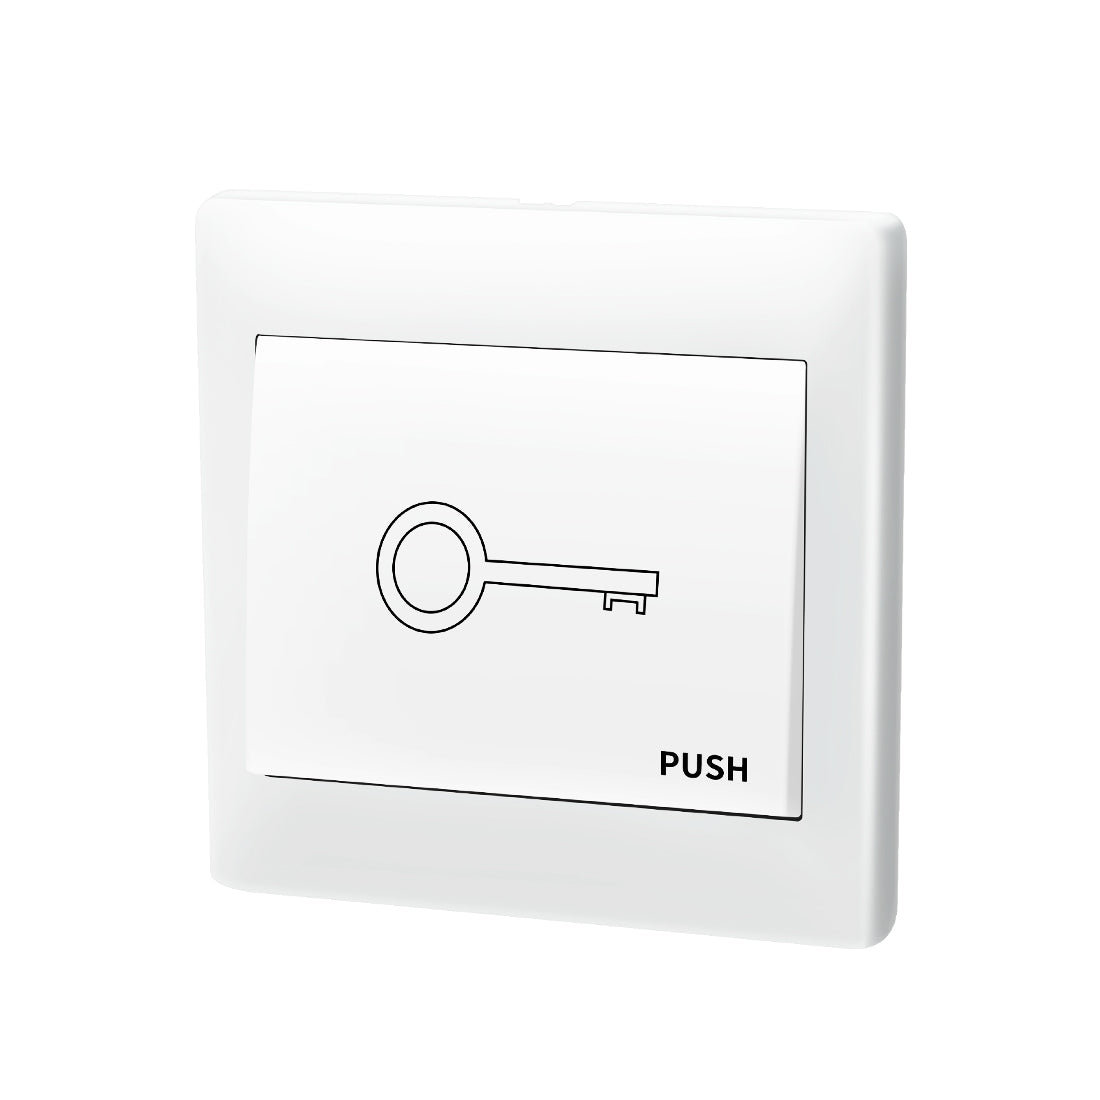 TC147 Wall Push Button Switch for Automatic Gate Opener